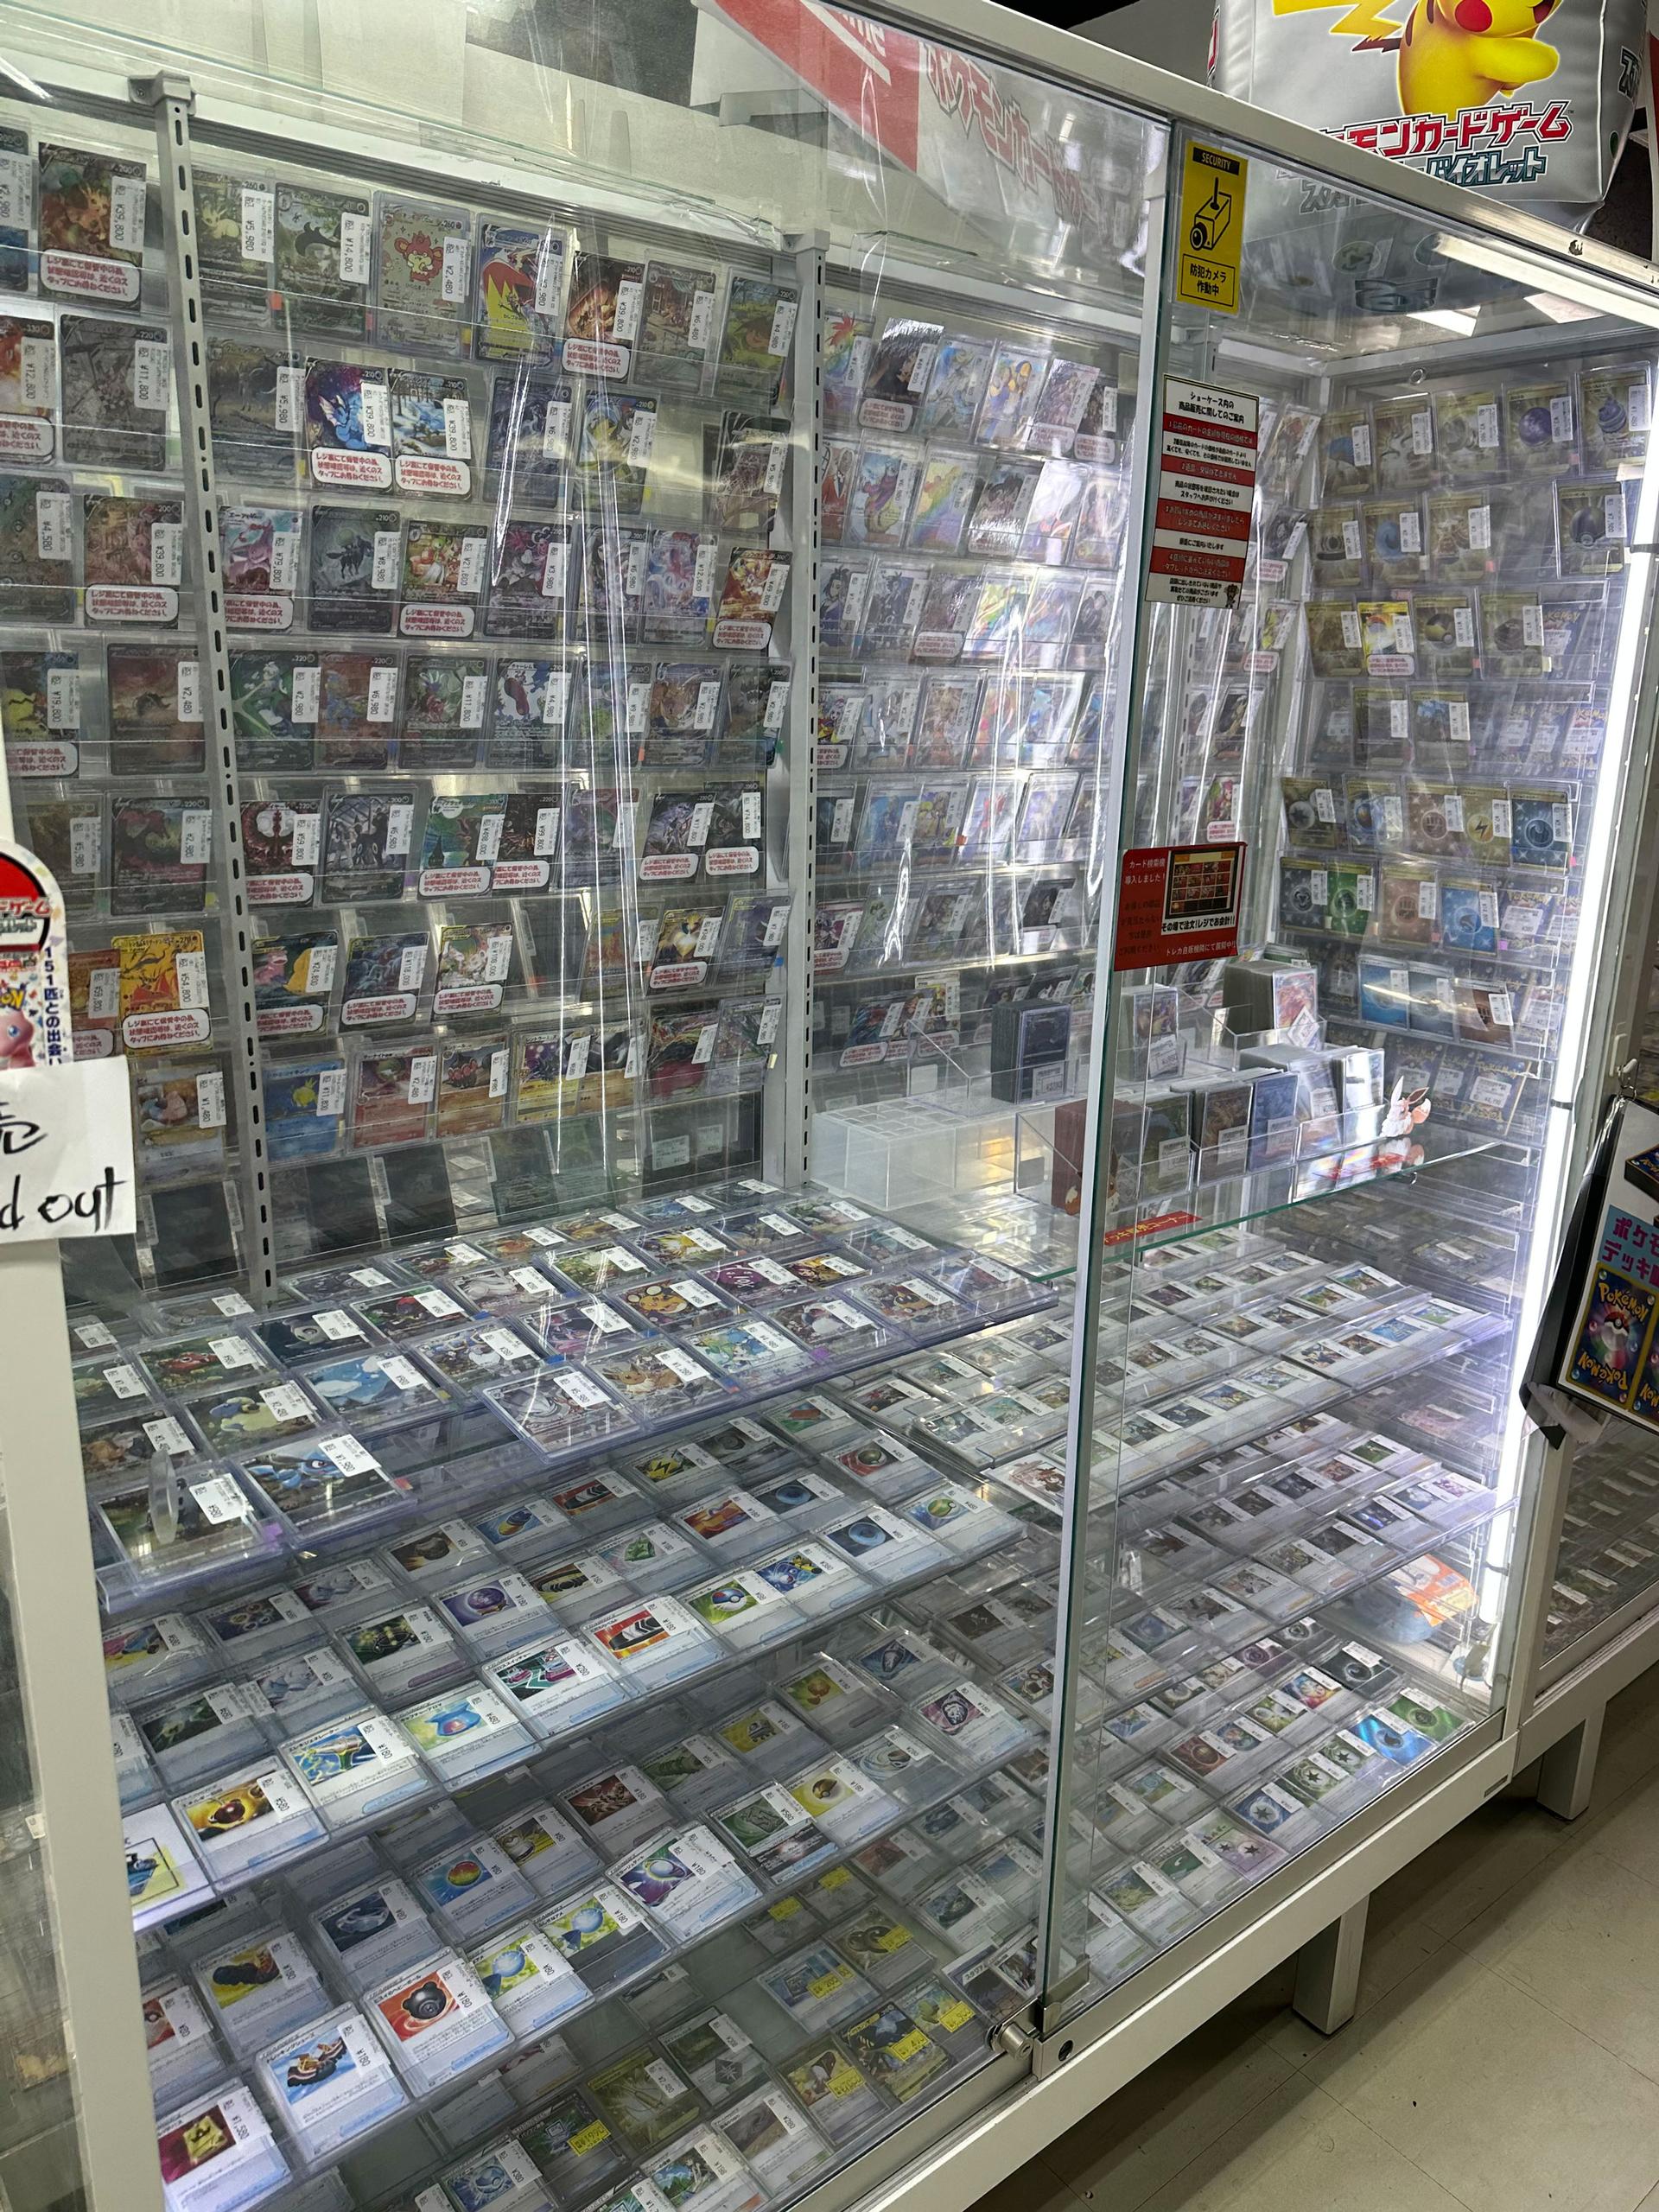 Pokémon cards are displayed in a glass cabinet. High-value cards are marked as 